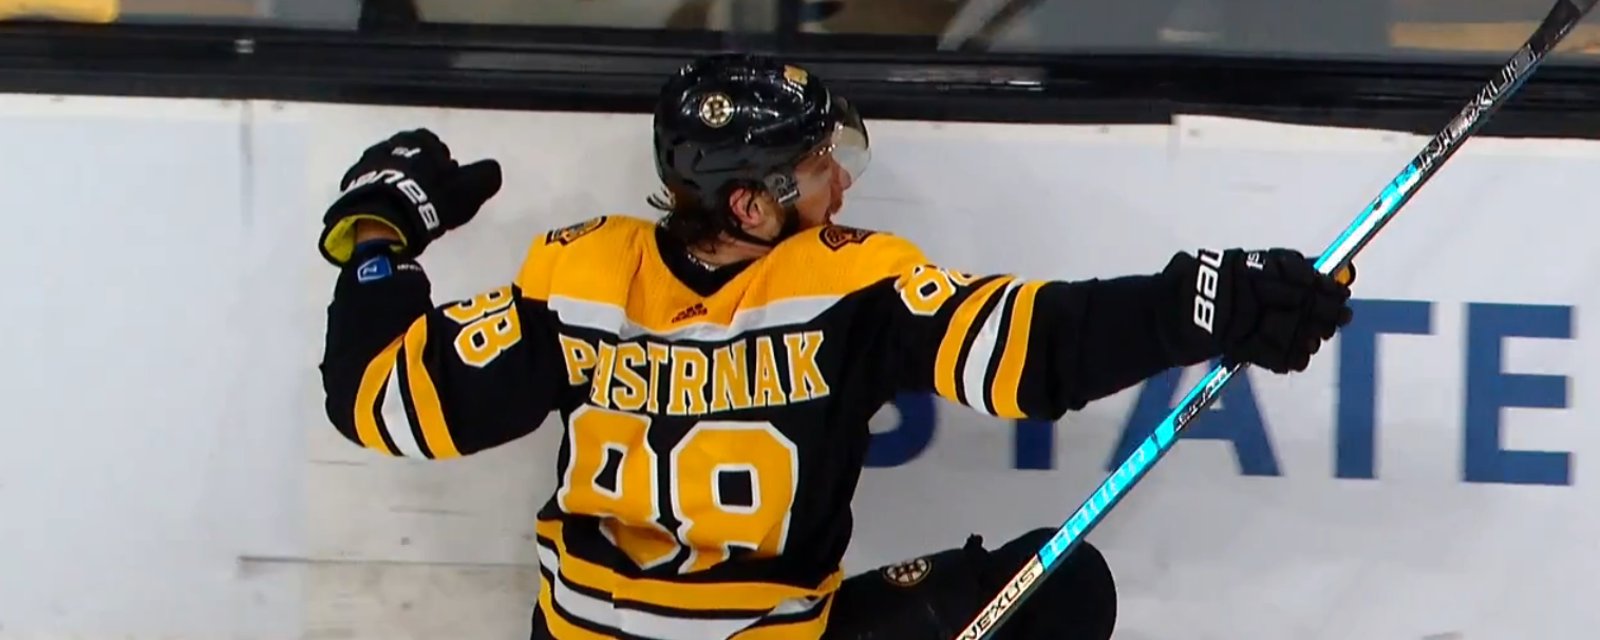 David Pastrnak reaches 60 goals with a hat trick on Sunday!